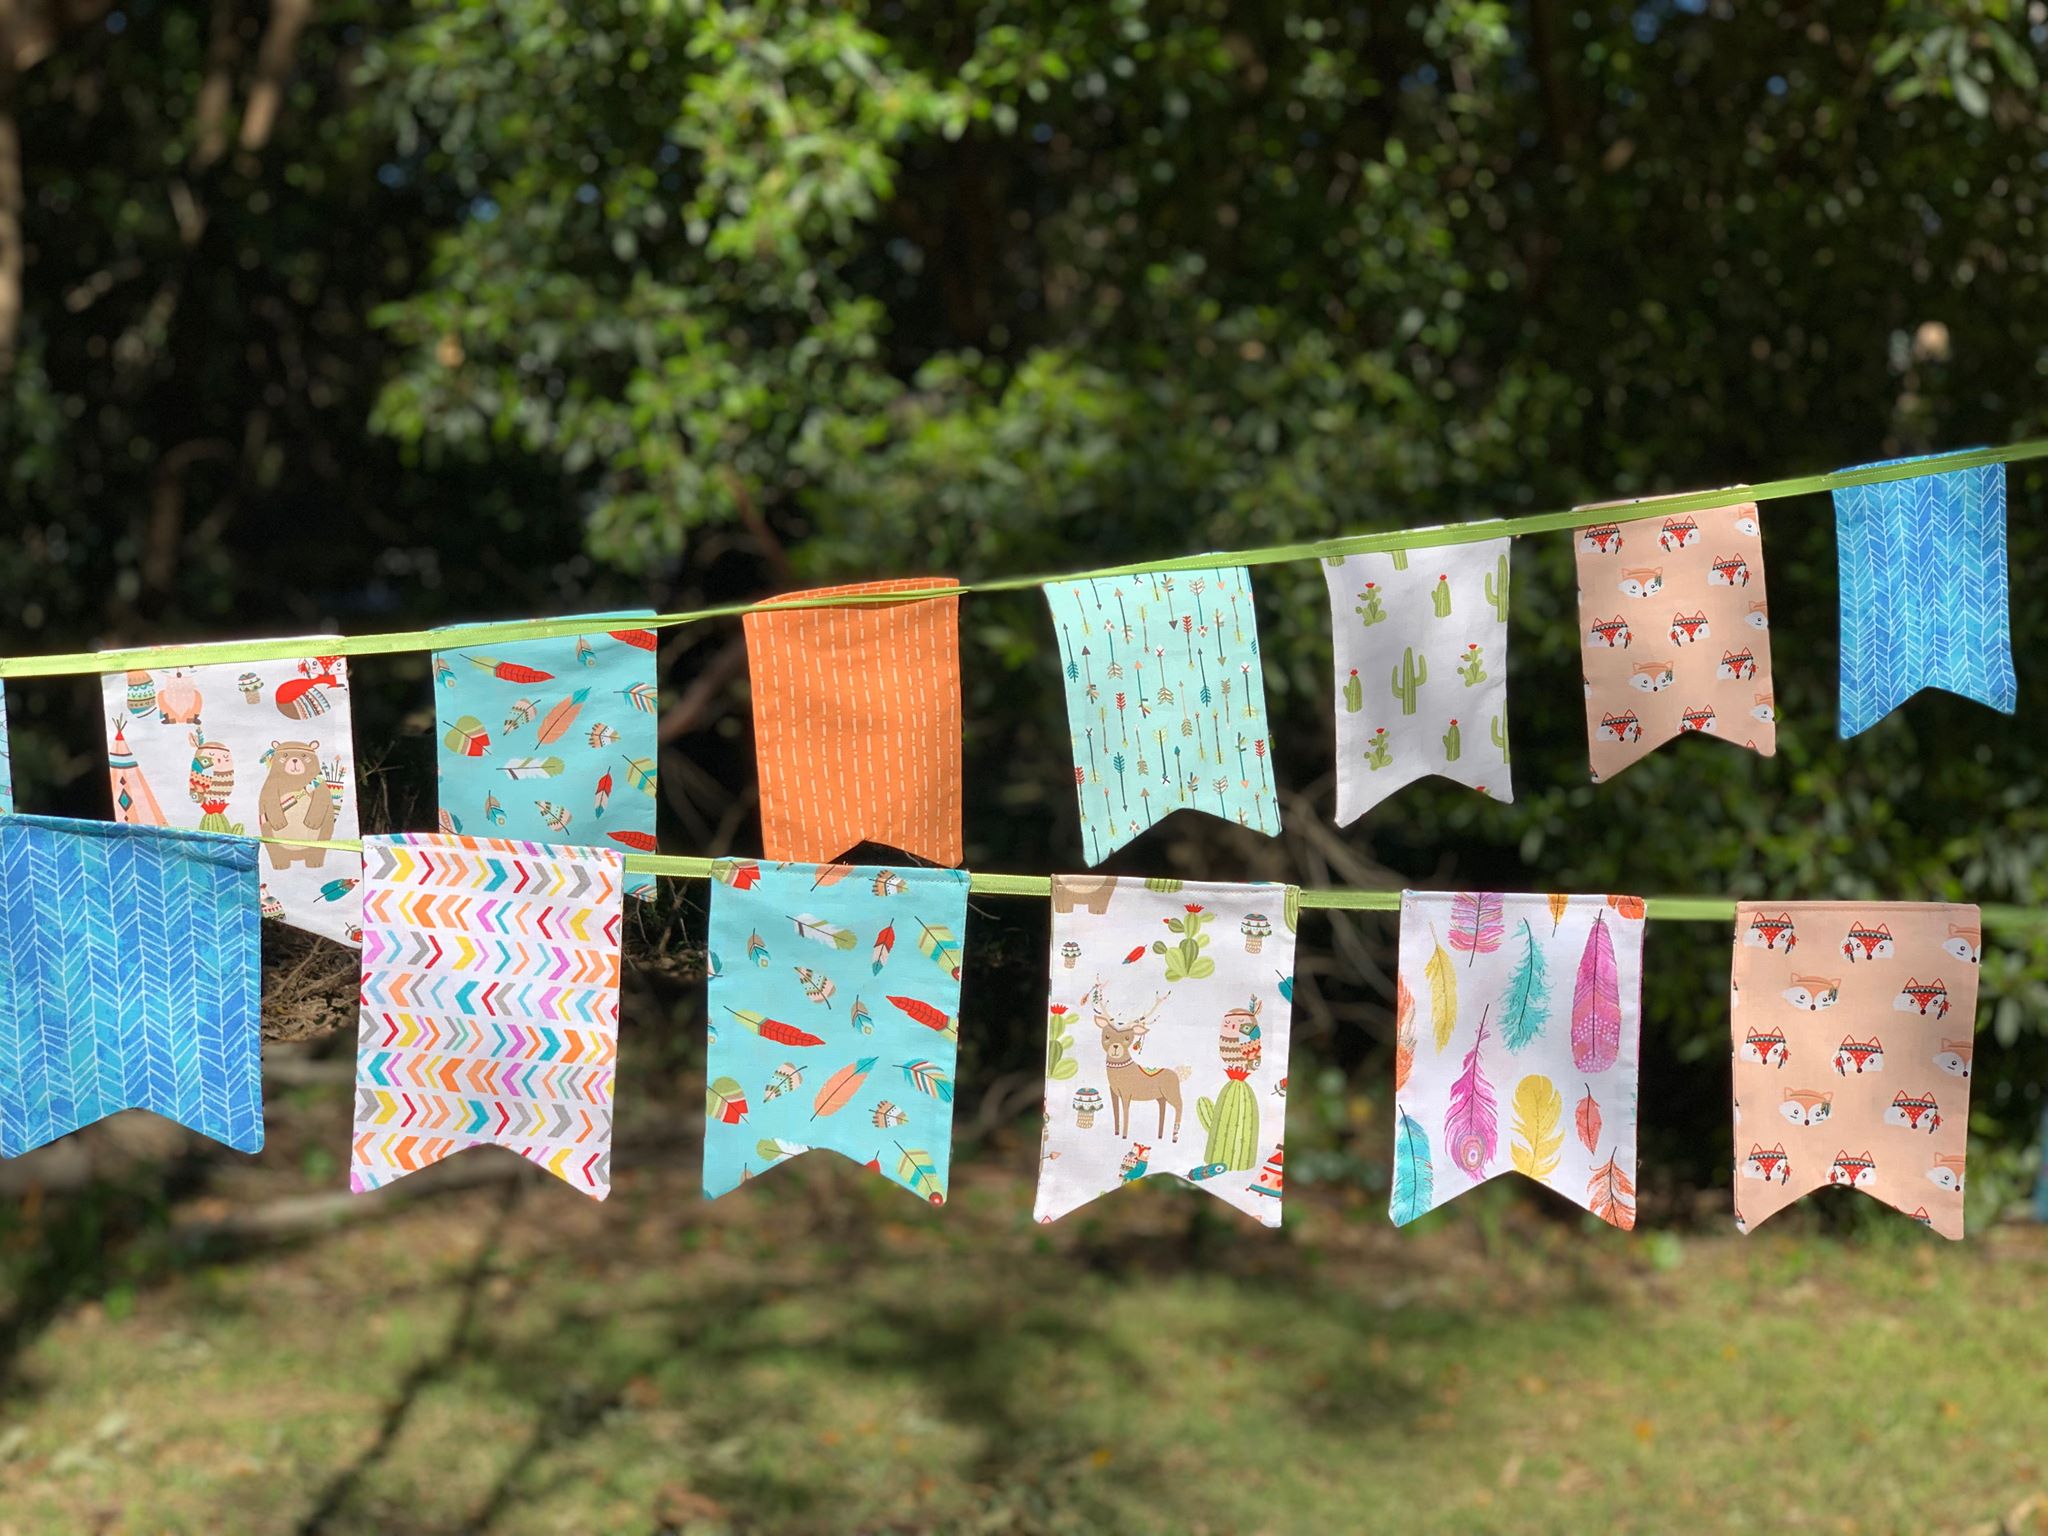 Foxing and bunting